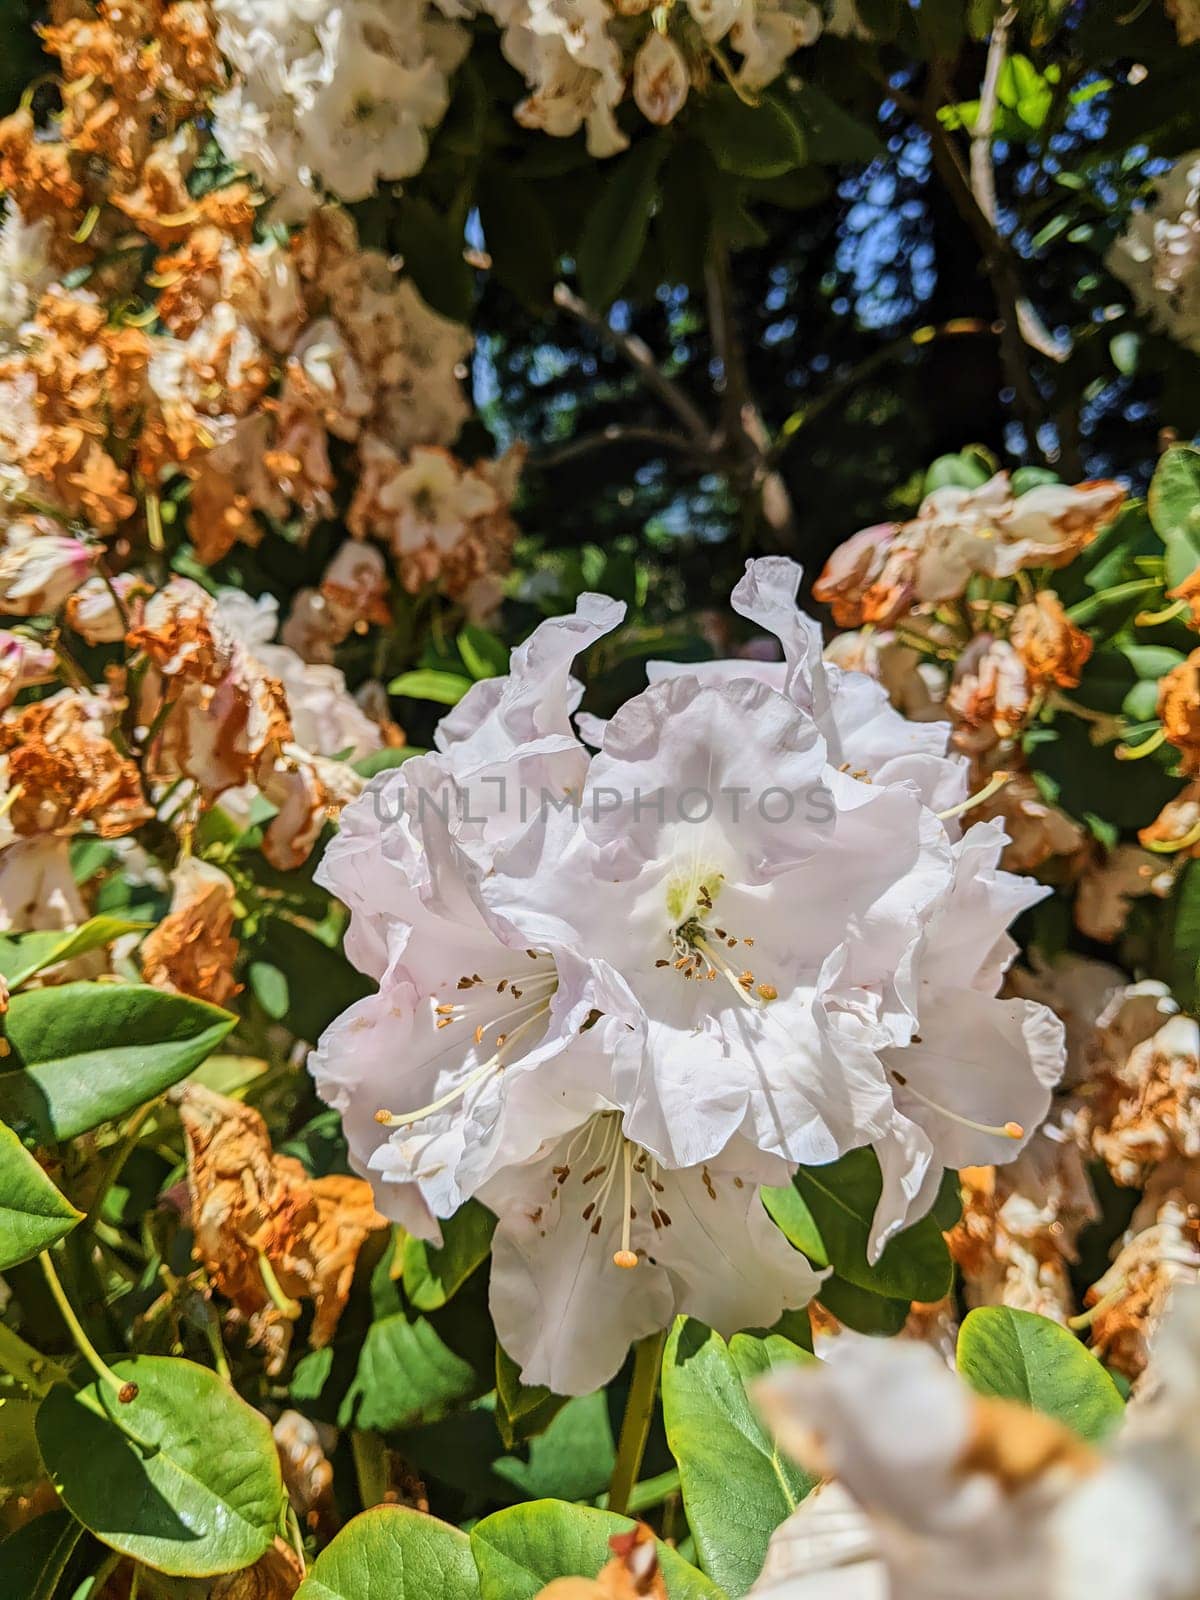 Vivid 2023 capture of a fresh white flower blooming amidst decaying petals in a sunlit Oakland, California garden, symbolizing life's impermanence